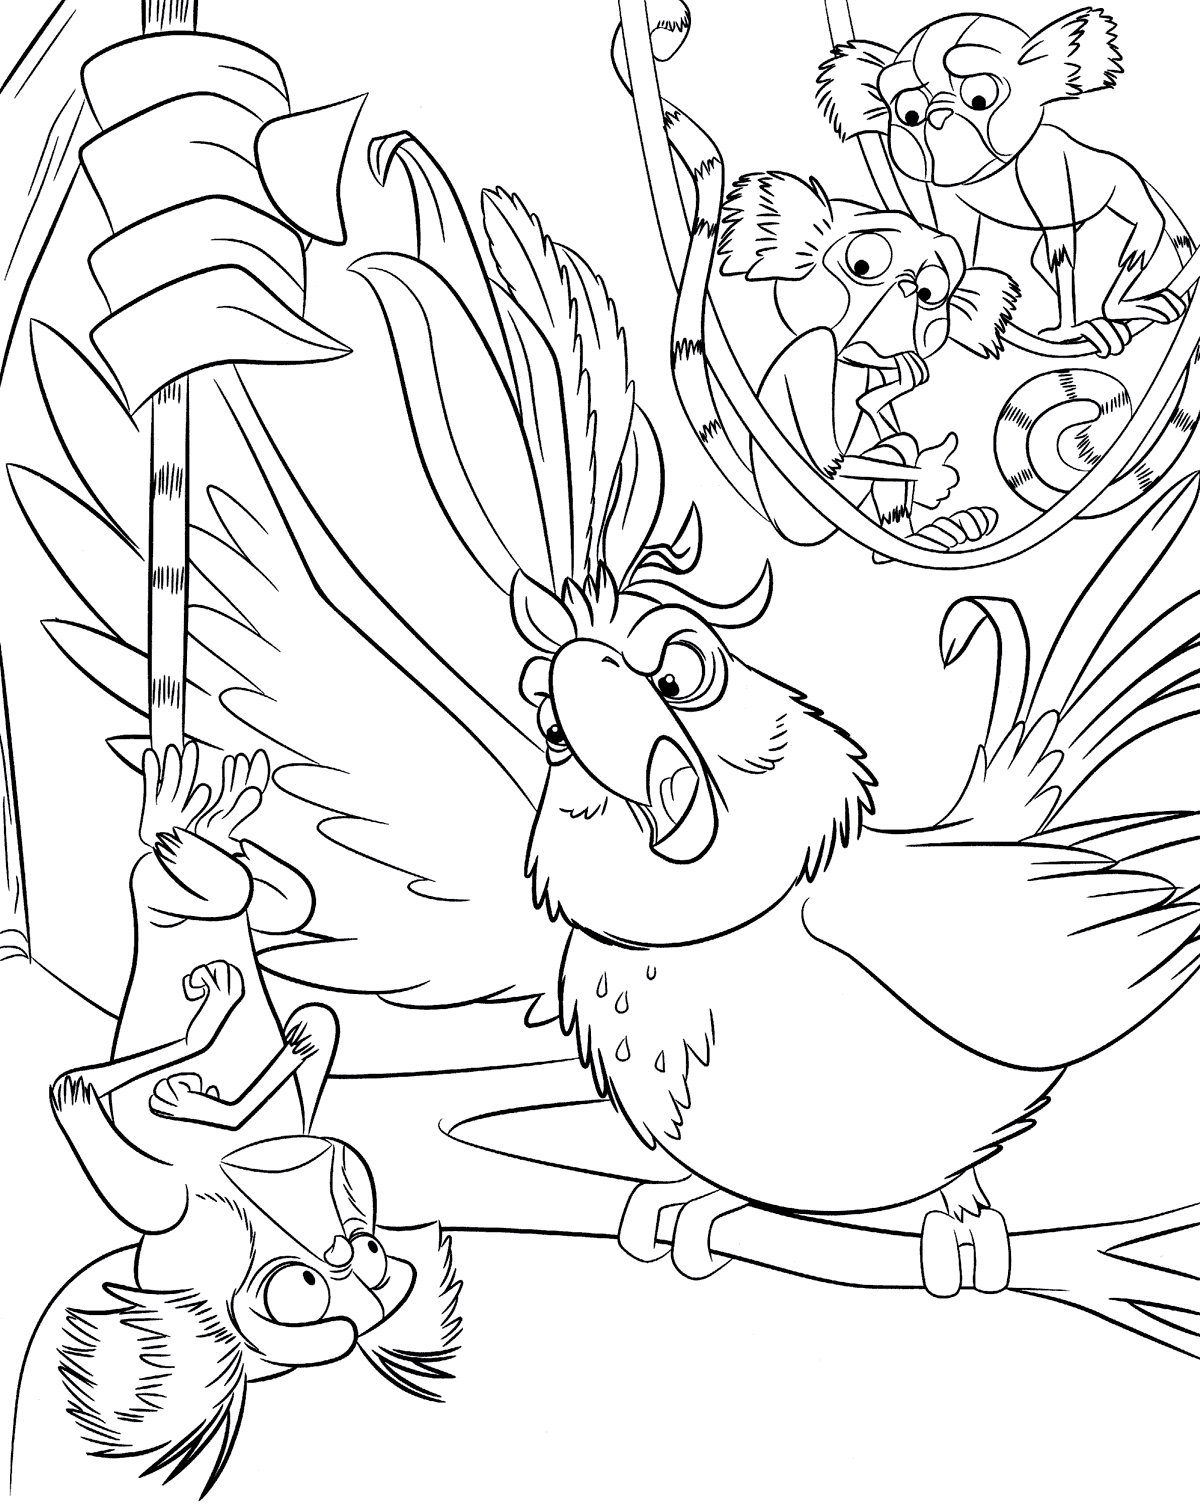 Coloring page - Funny monkey